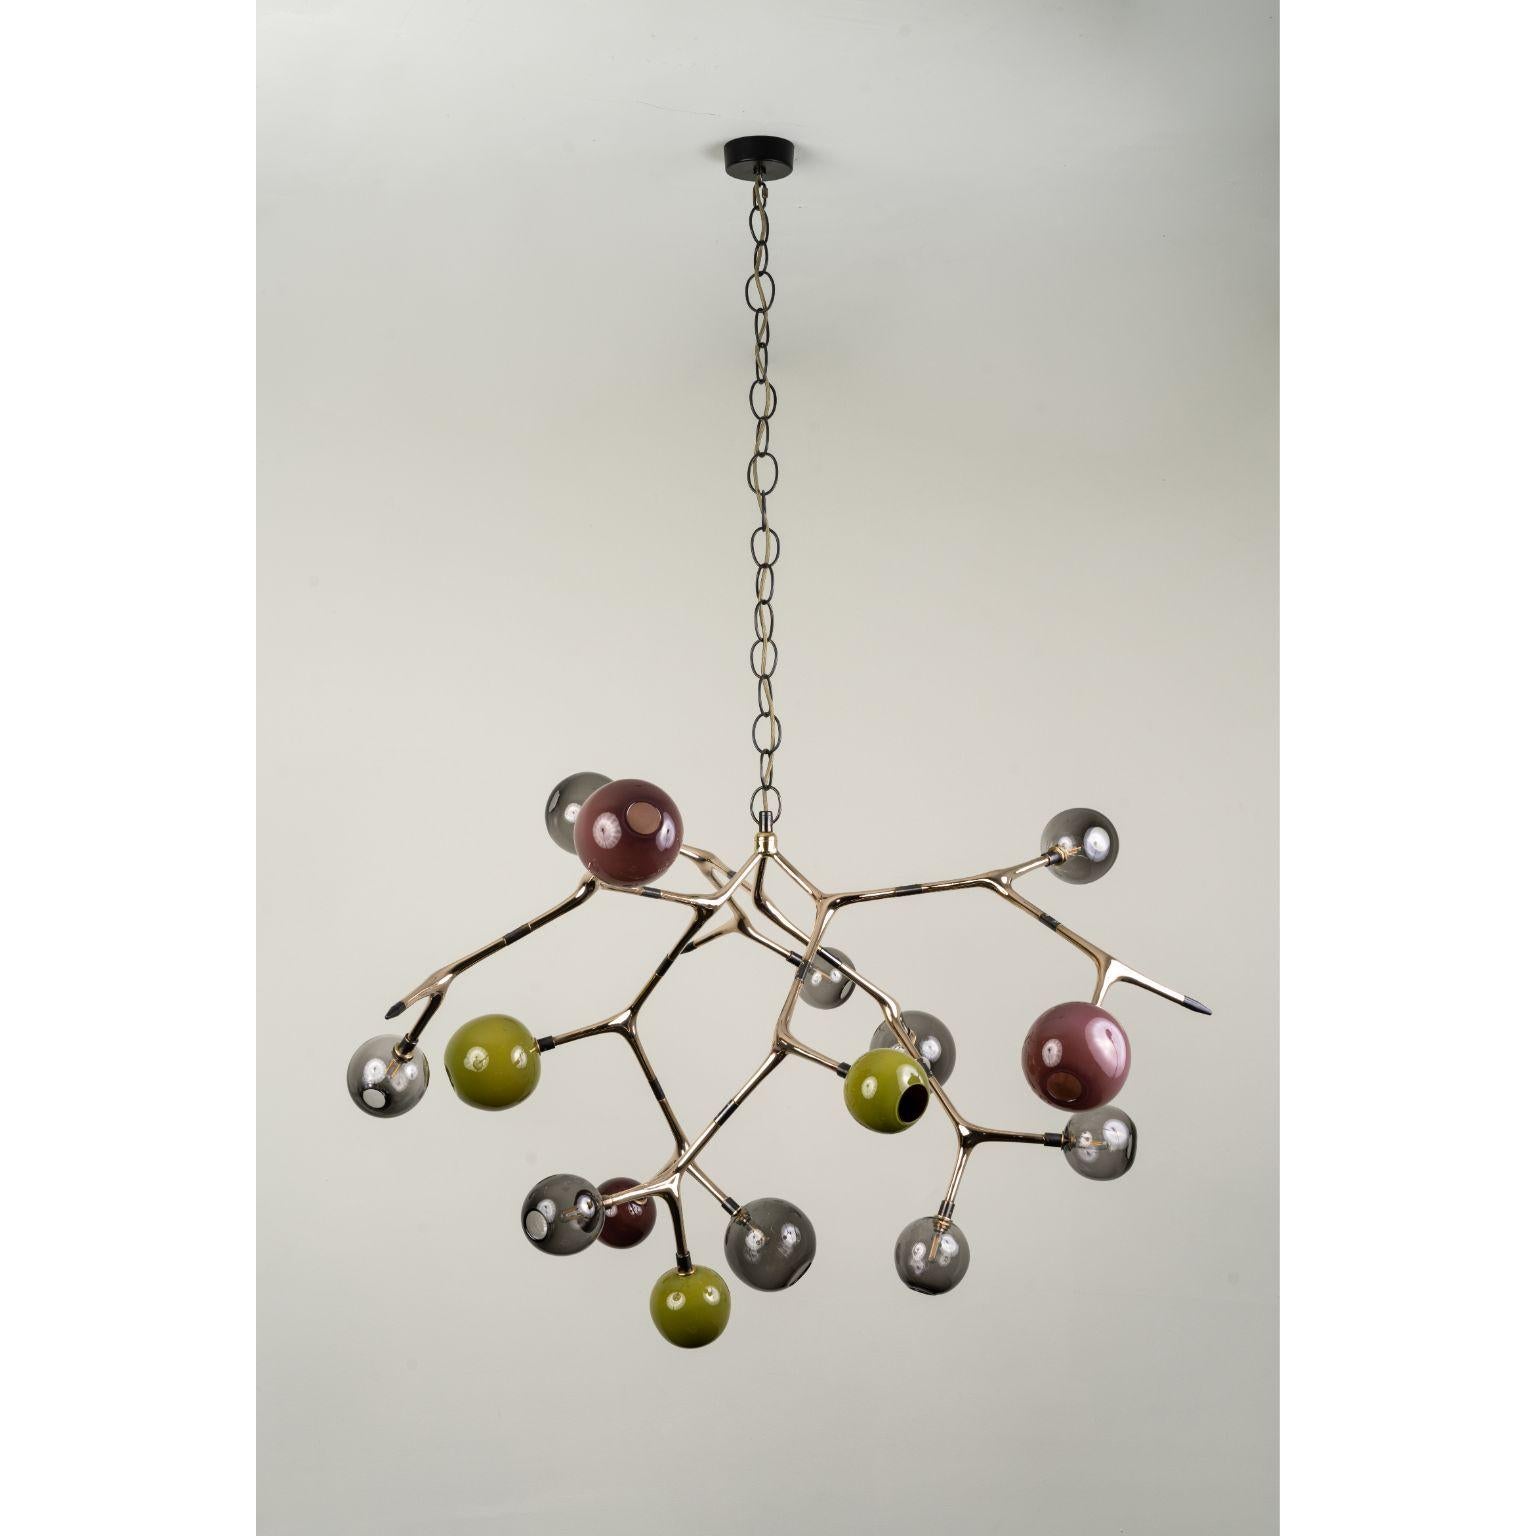 Stone and Polished Bronze Maratus 15 Pendant Lamp by Isabel Moncada
Dimensions: Ø 135 x H 160 cm.
Materials: Cast bronze, blown glass and turned brass.
Weight: 20 kg.

The image of a swarm of small lights at night is mesmerizing. Maratus 15 is a